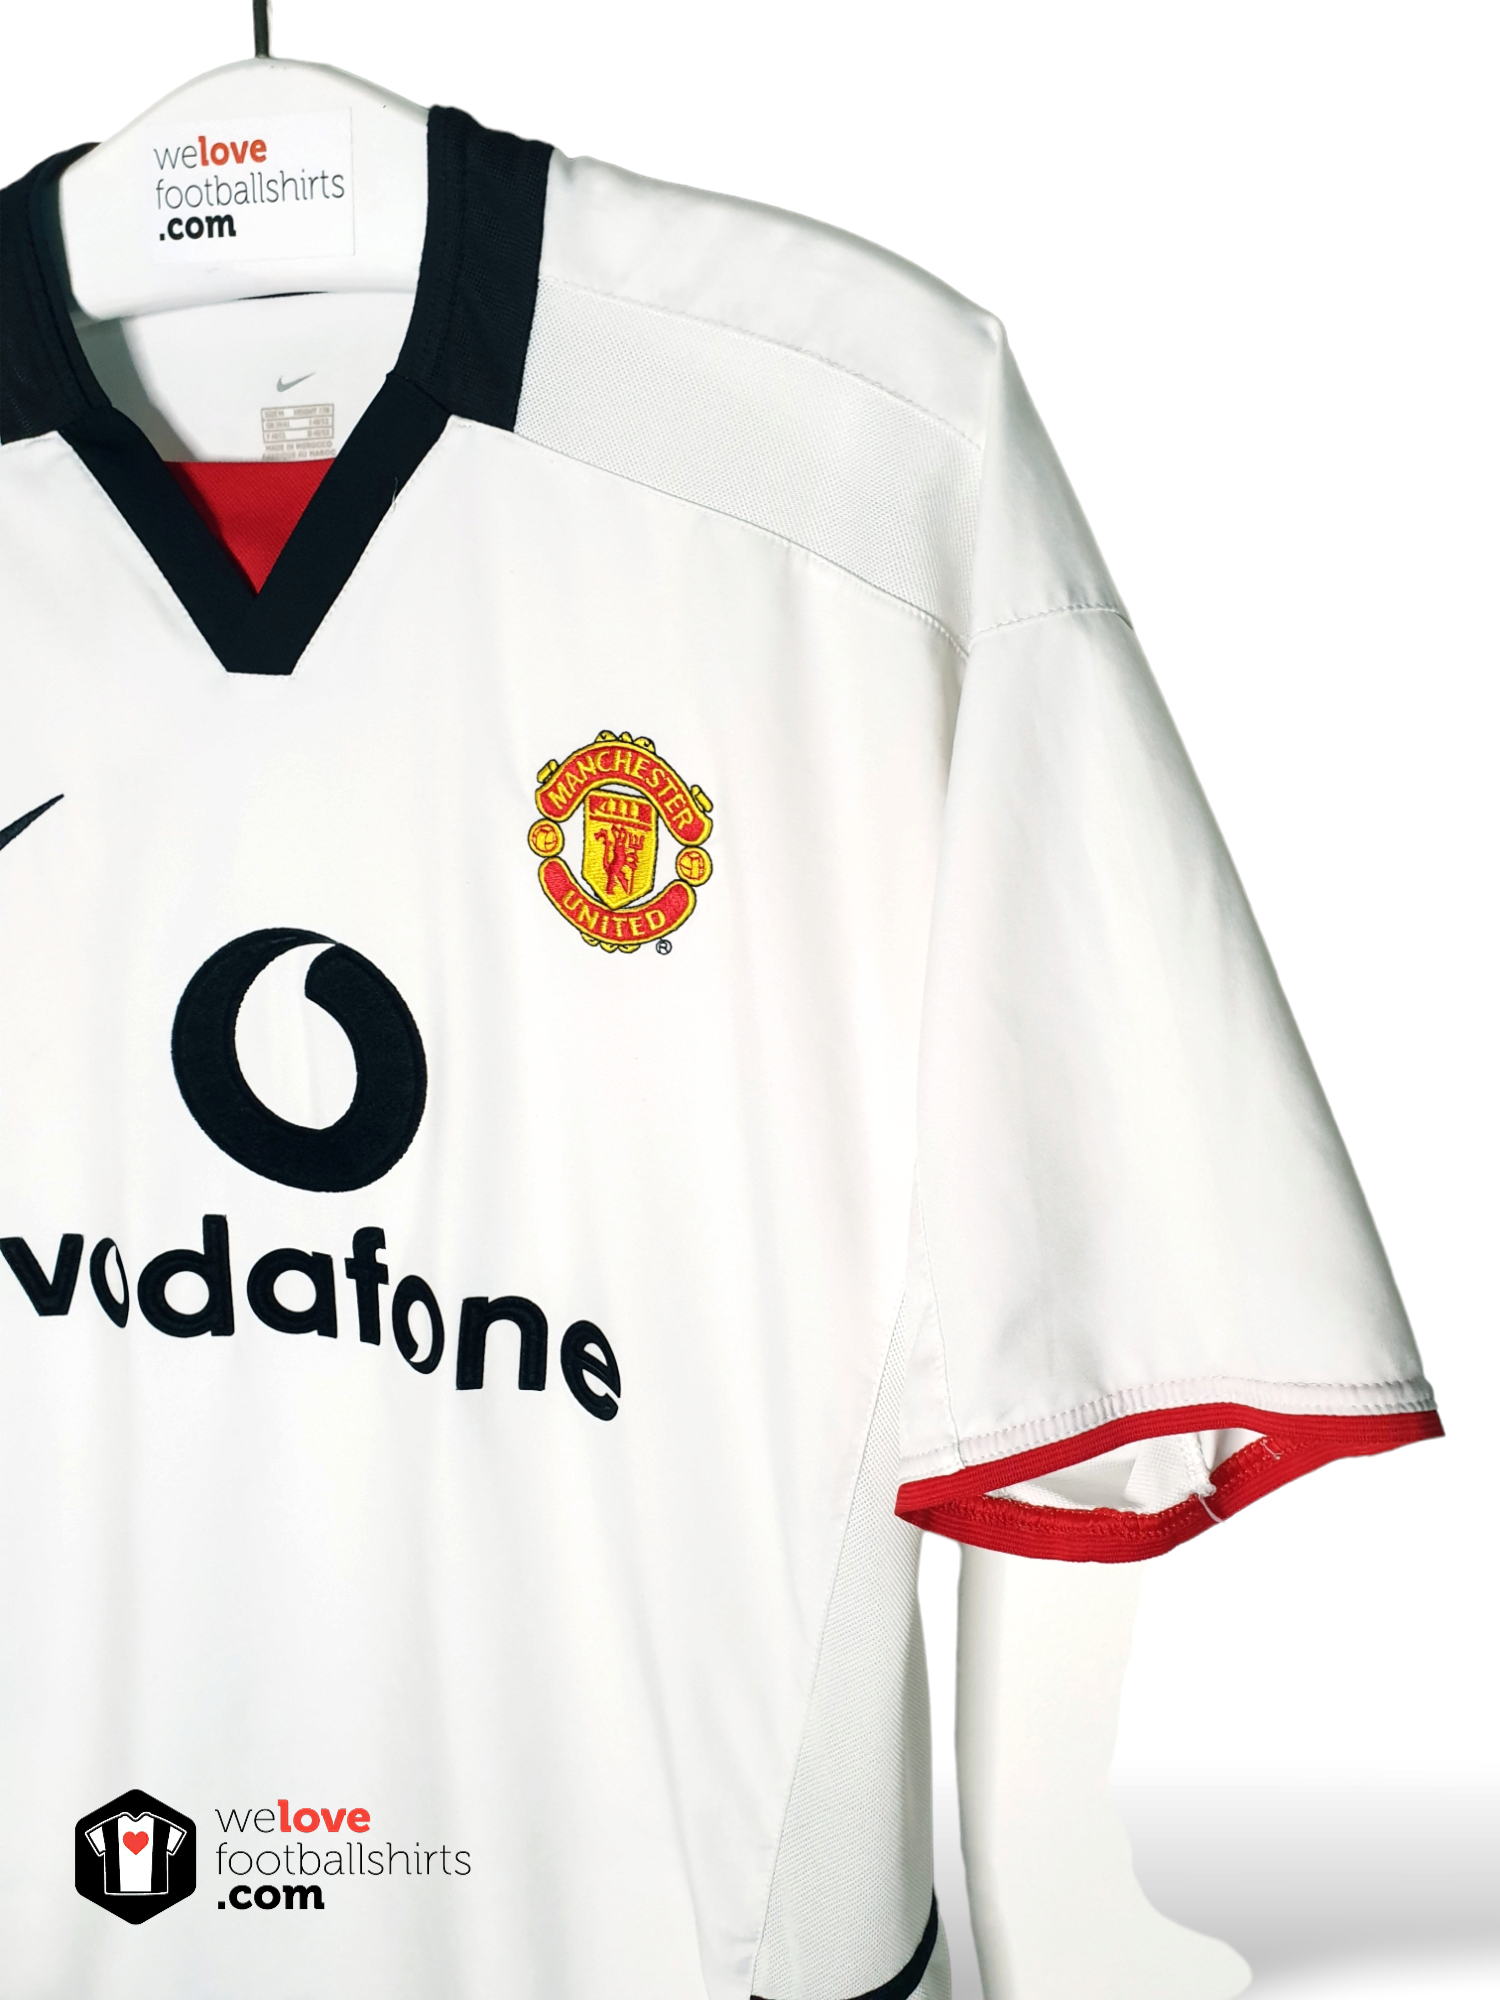 00s Manchester United game shirts